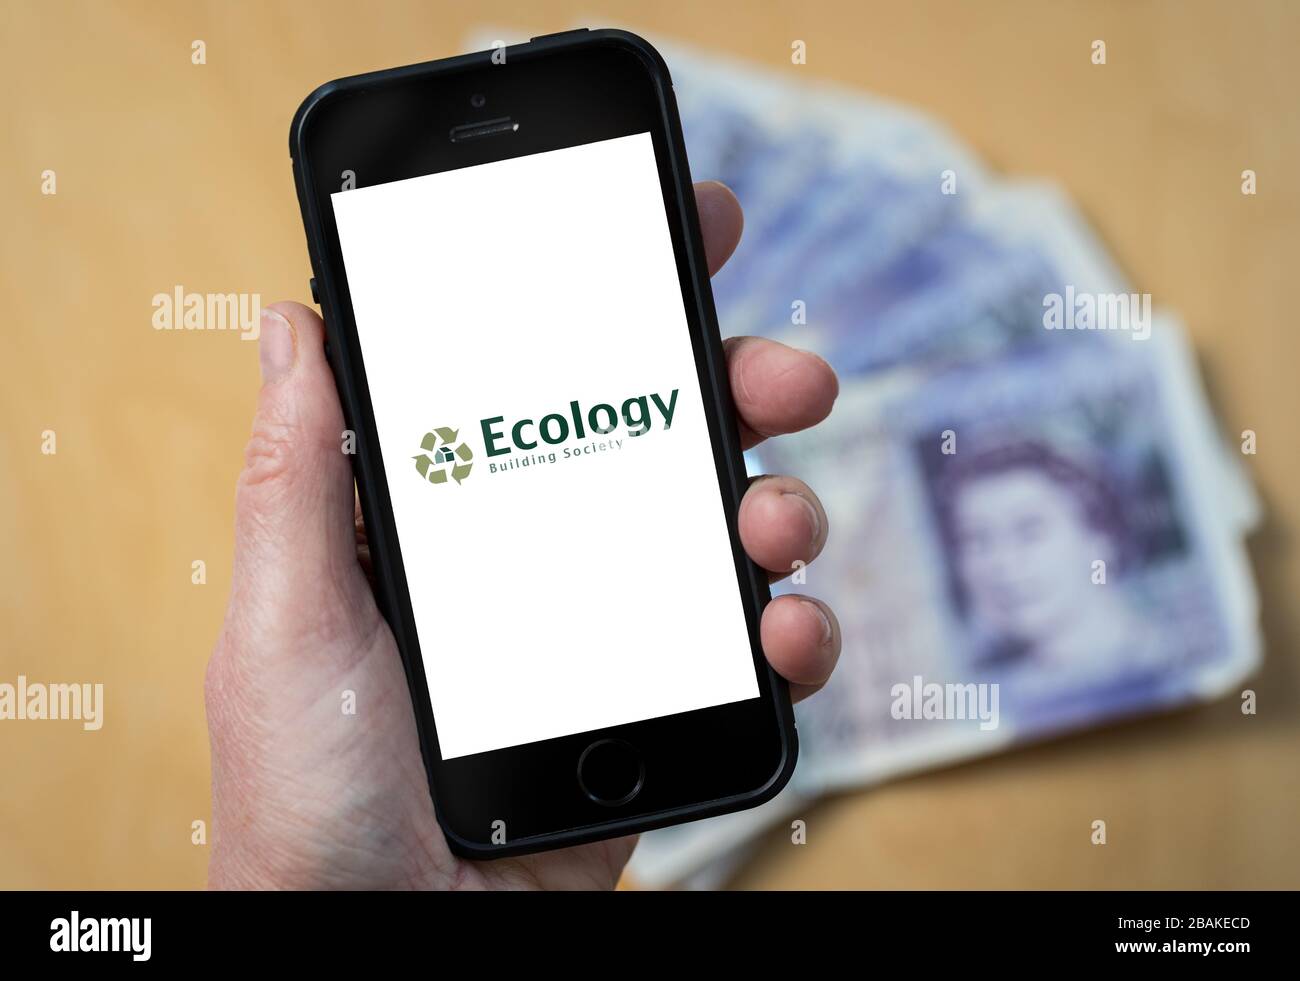 A woman holding a mobile phone showing Ecology Building Society (editorial use only) Stock Photo